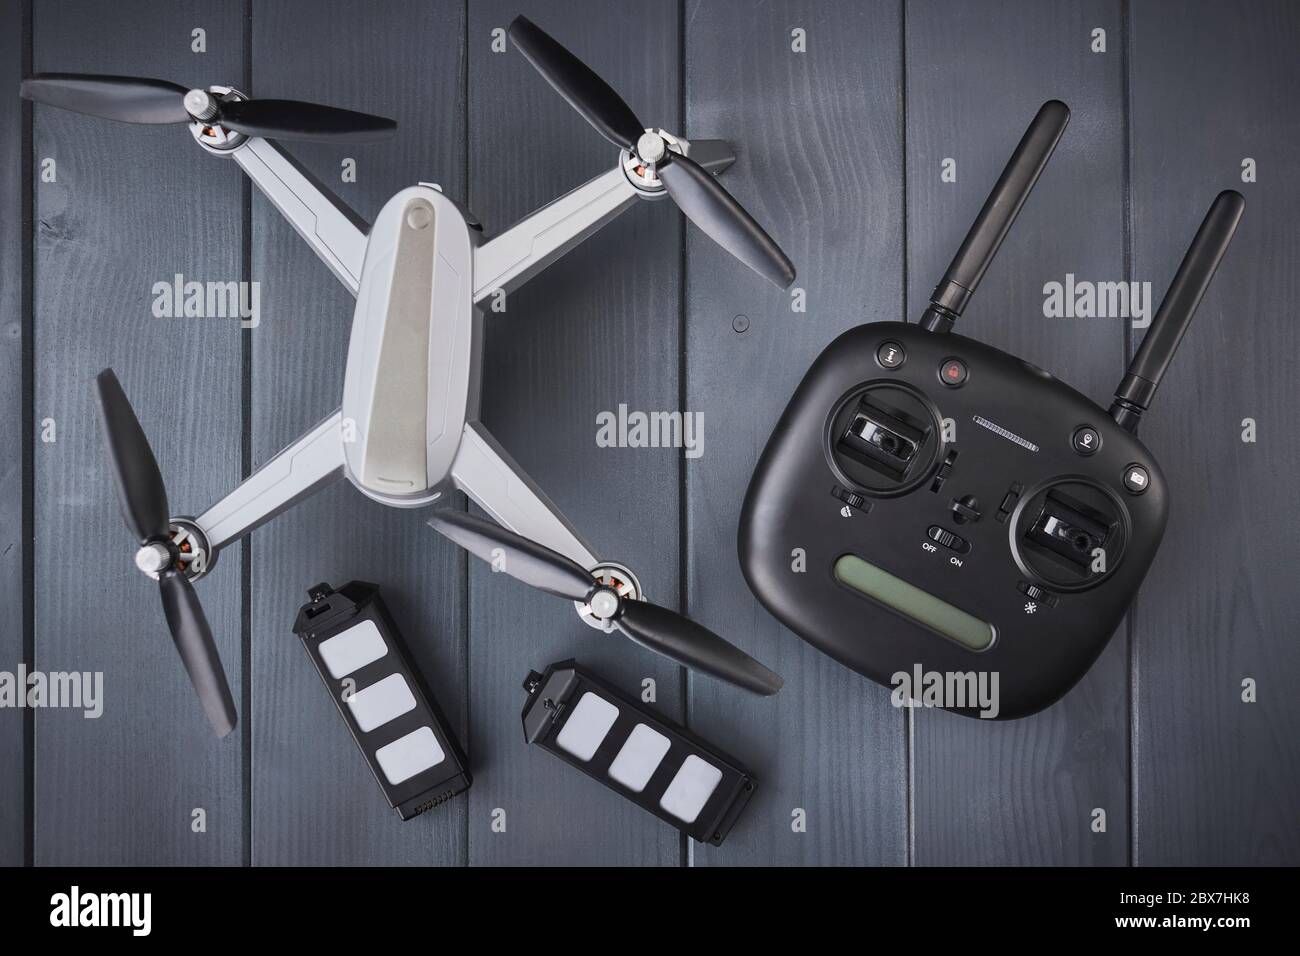 Quad-engine drone with high-resolution camera, batteries and radio control with dual frequency for capturing aerial images Stock Photo